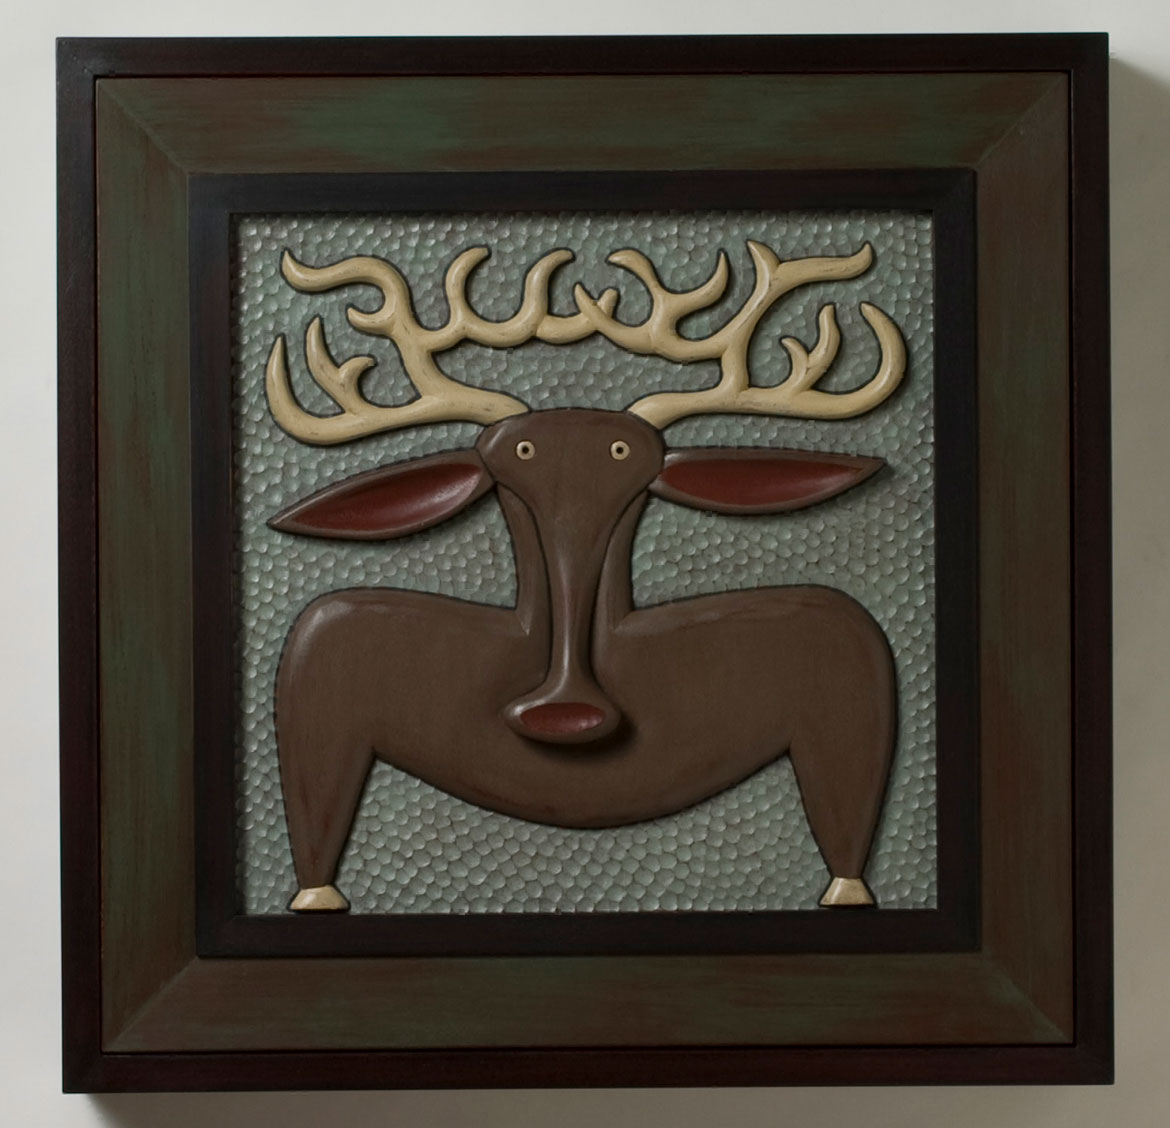 Judy Kensley McKie, "Moose Wall Cabinet," 2008, carved and painted basswood. (Gallery NAGA)